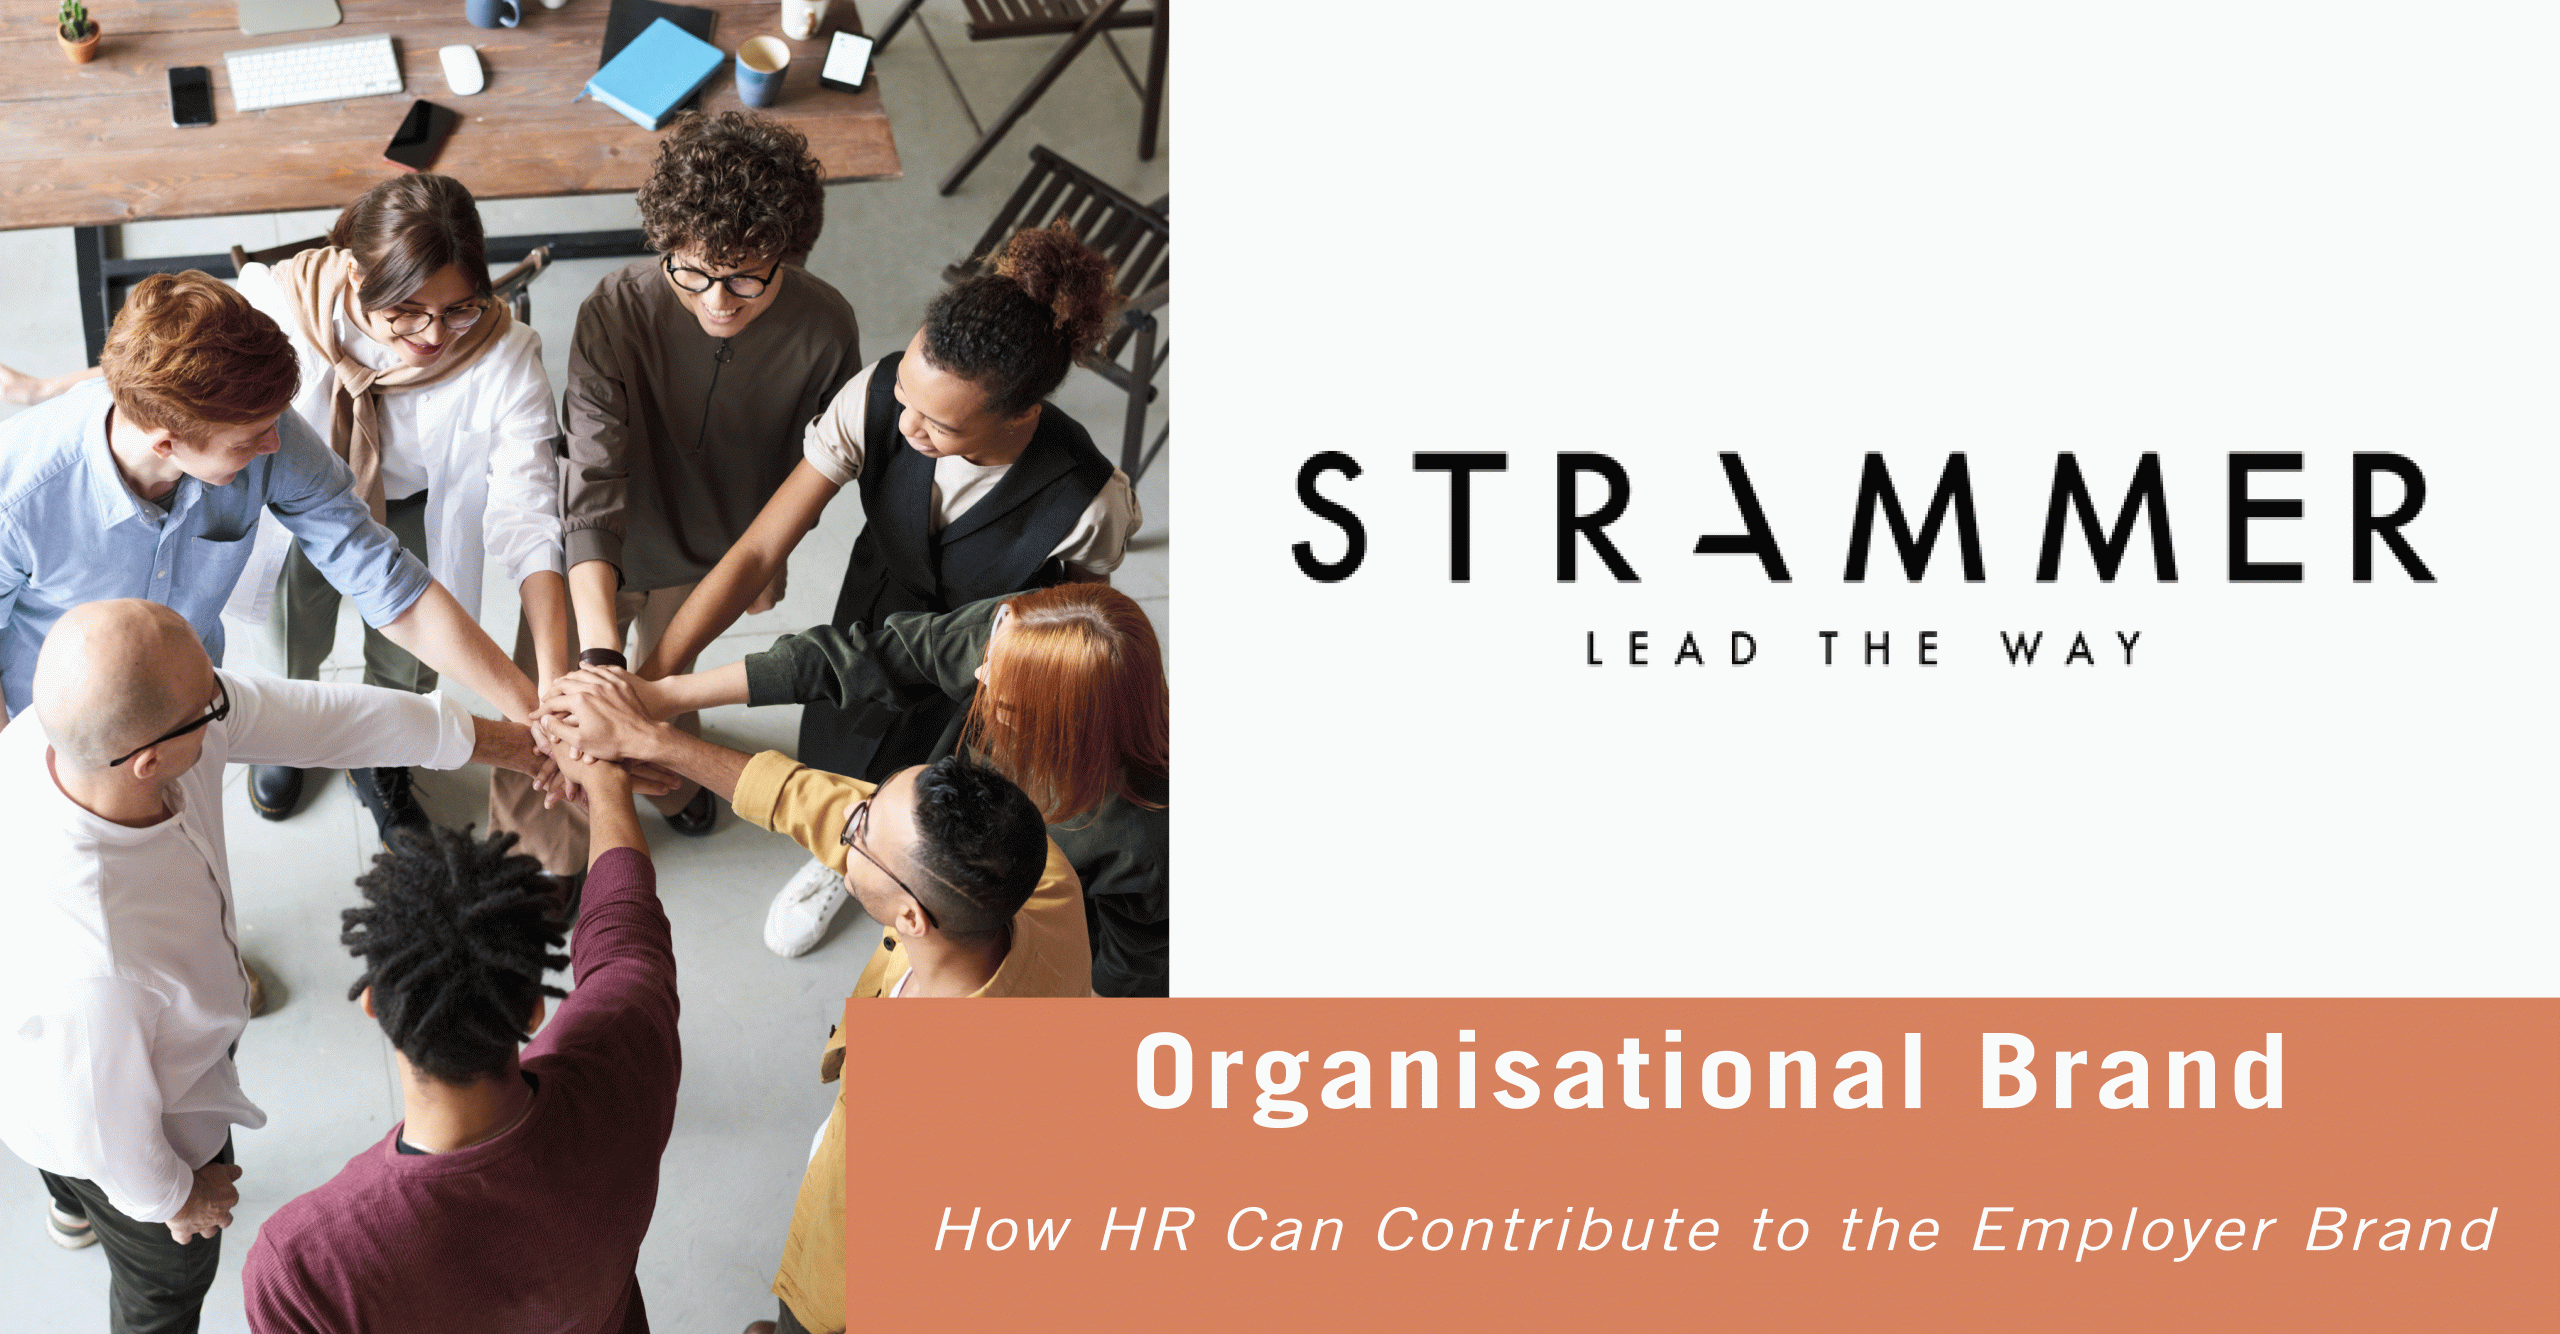 How HR Can Contribute to the Organisational Brand